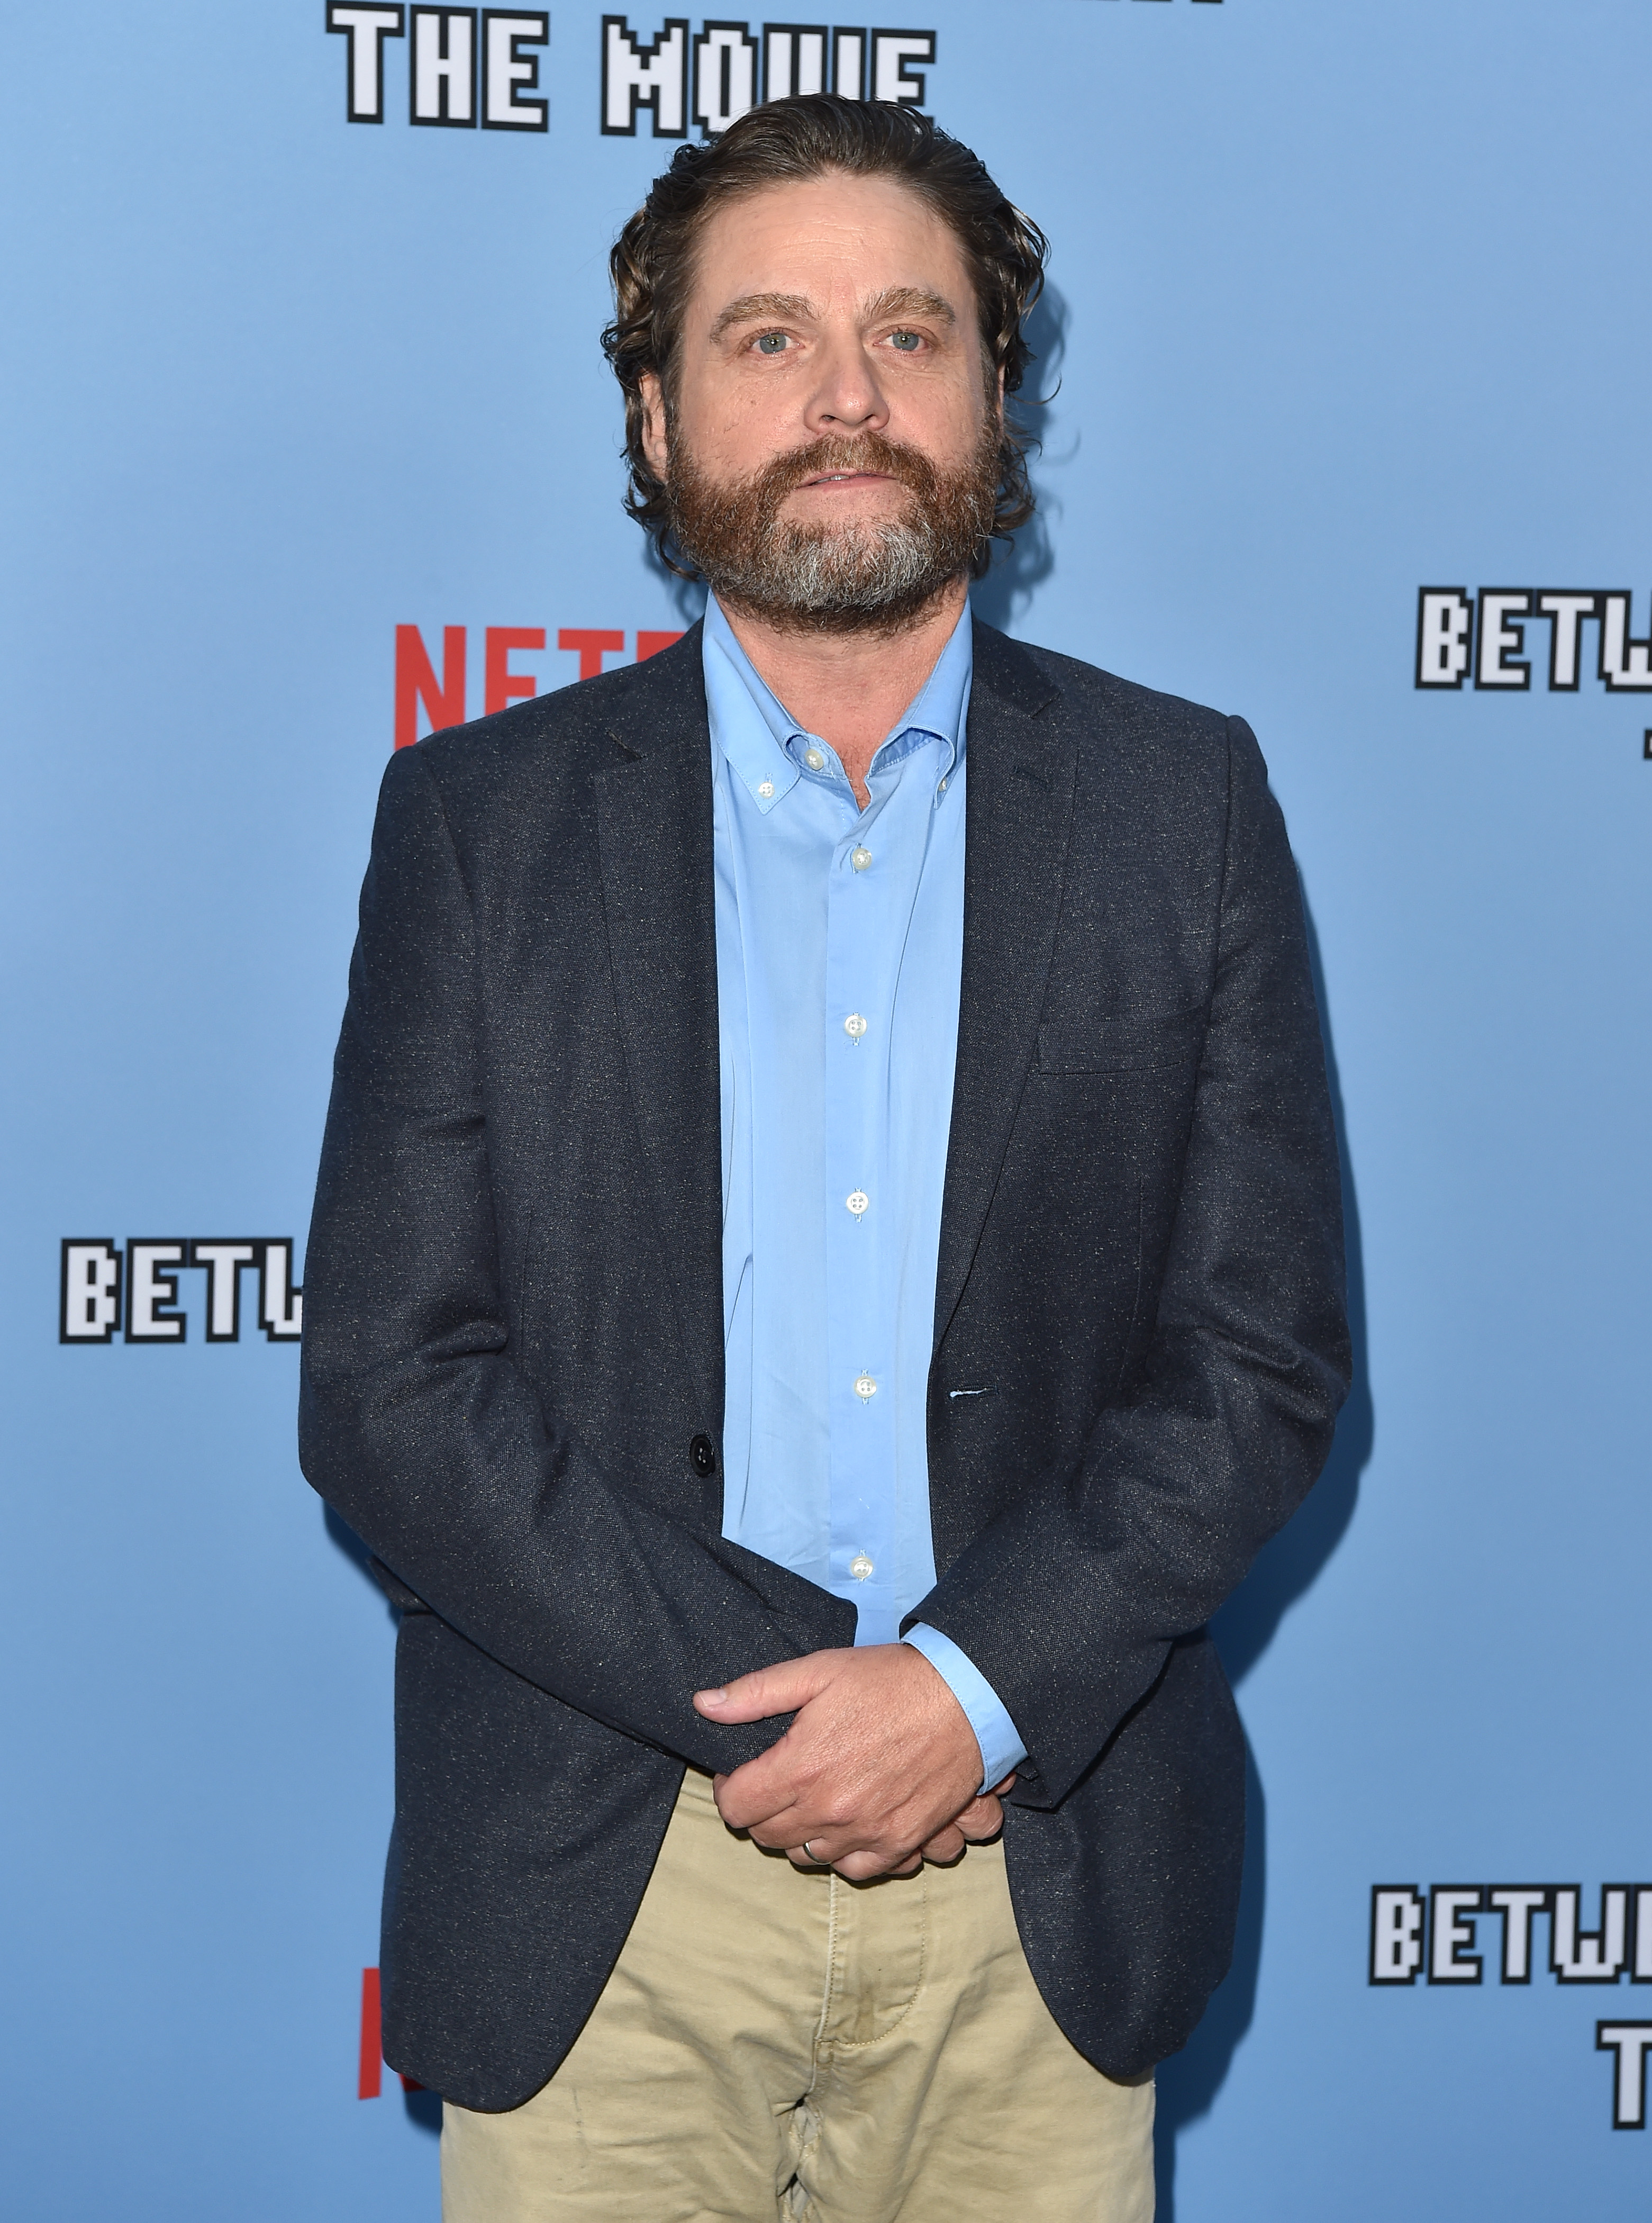 Zach Galifianakis attends the LA Premiere of Netflix's "Between Two Ferns: The Movie" in Hollywood, California, on September 16, 2019. | Source: Getty Images